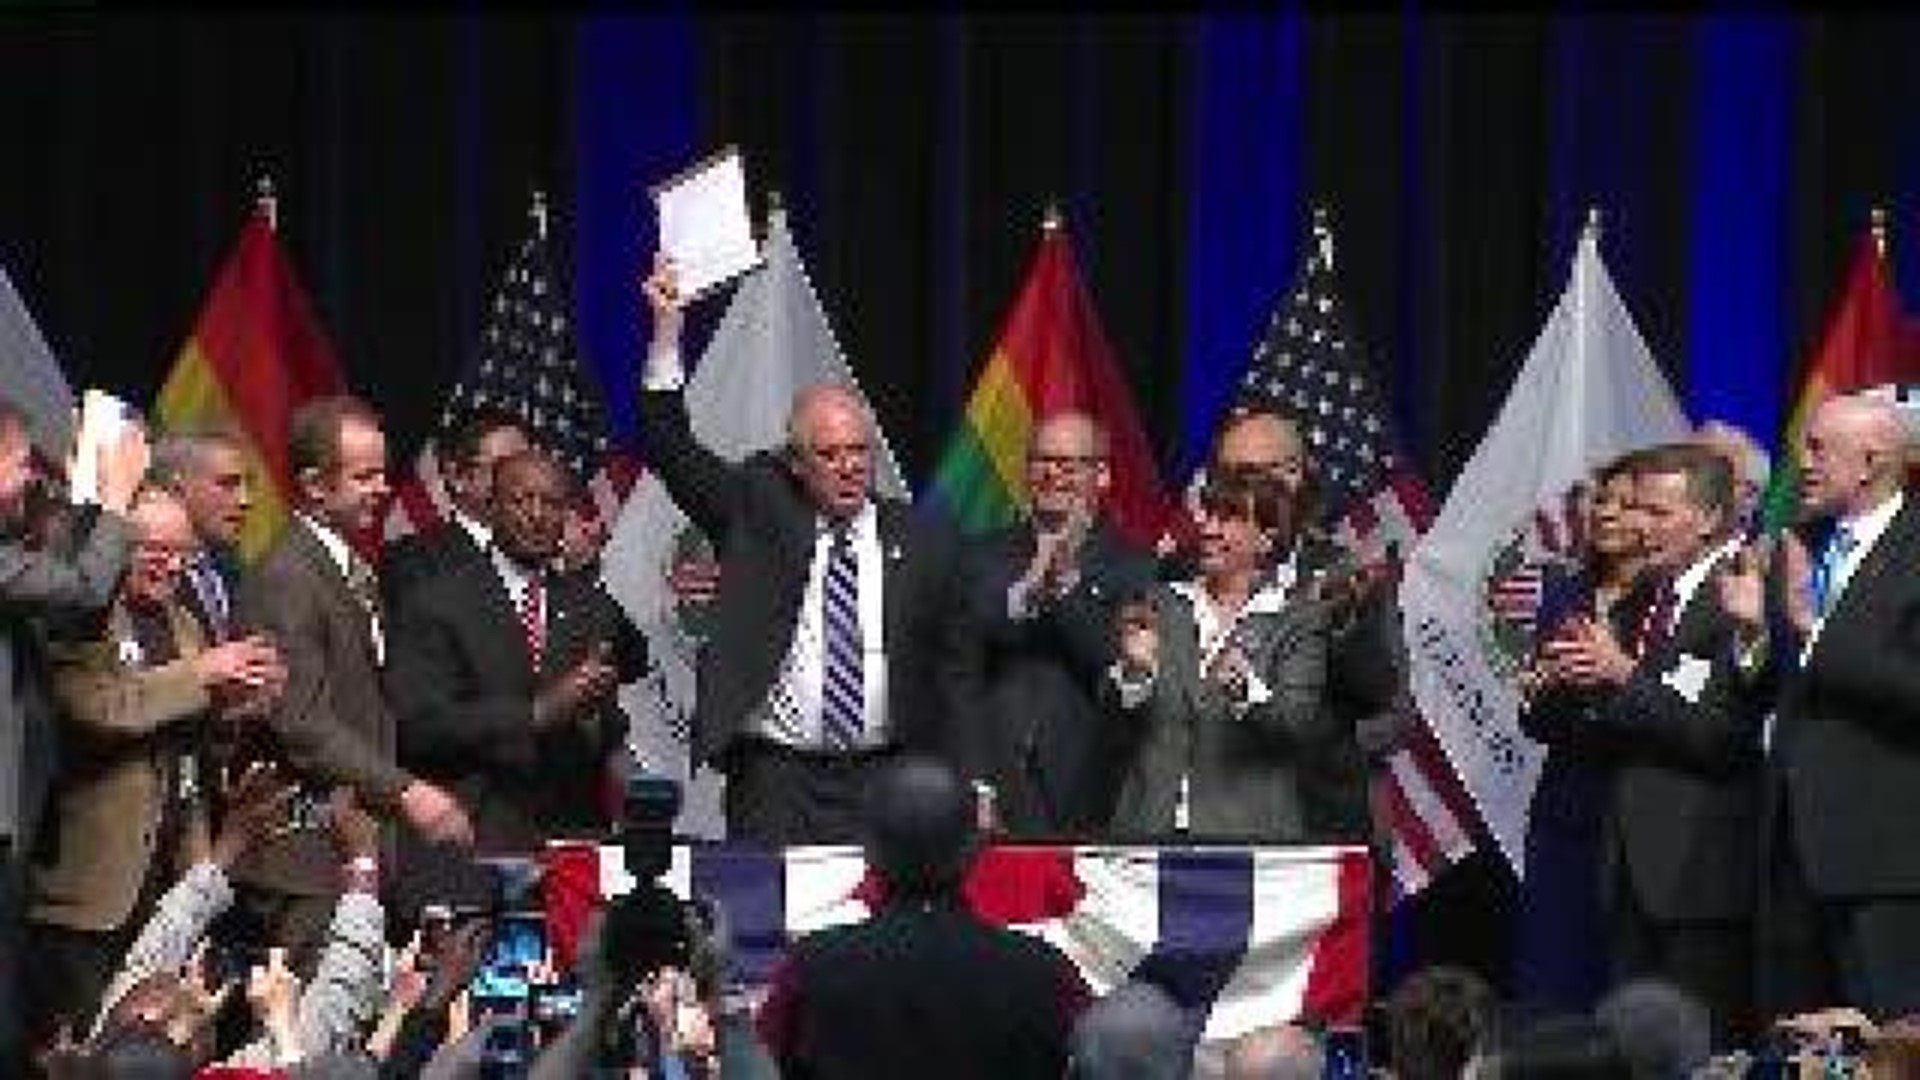 Illinois becomes 16th state to legalize marriage equality